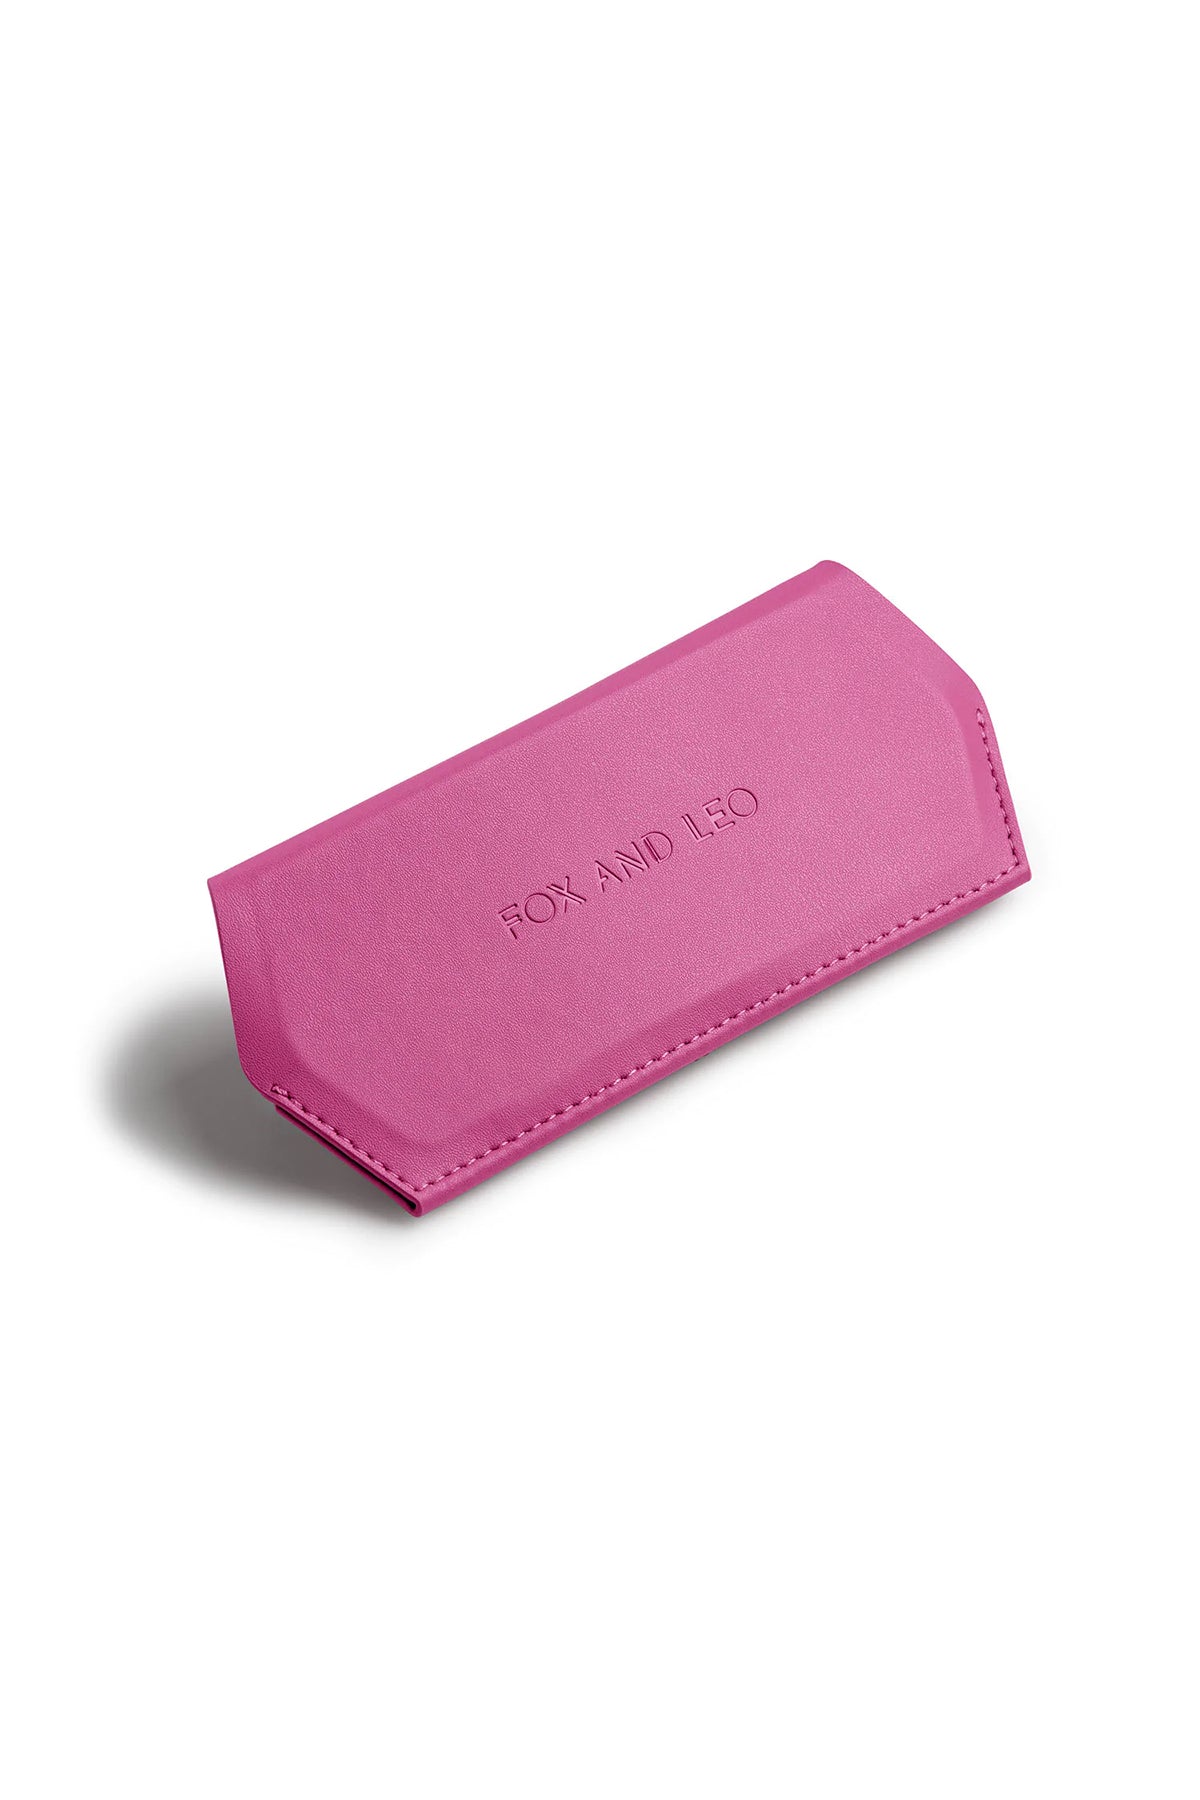 Fox and Leo Case Hot Pink